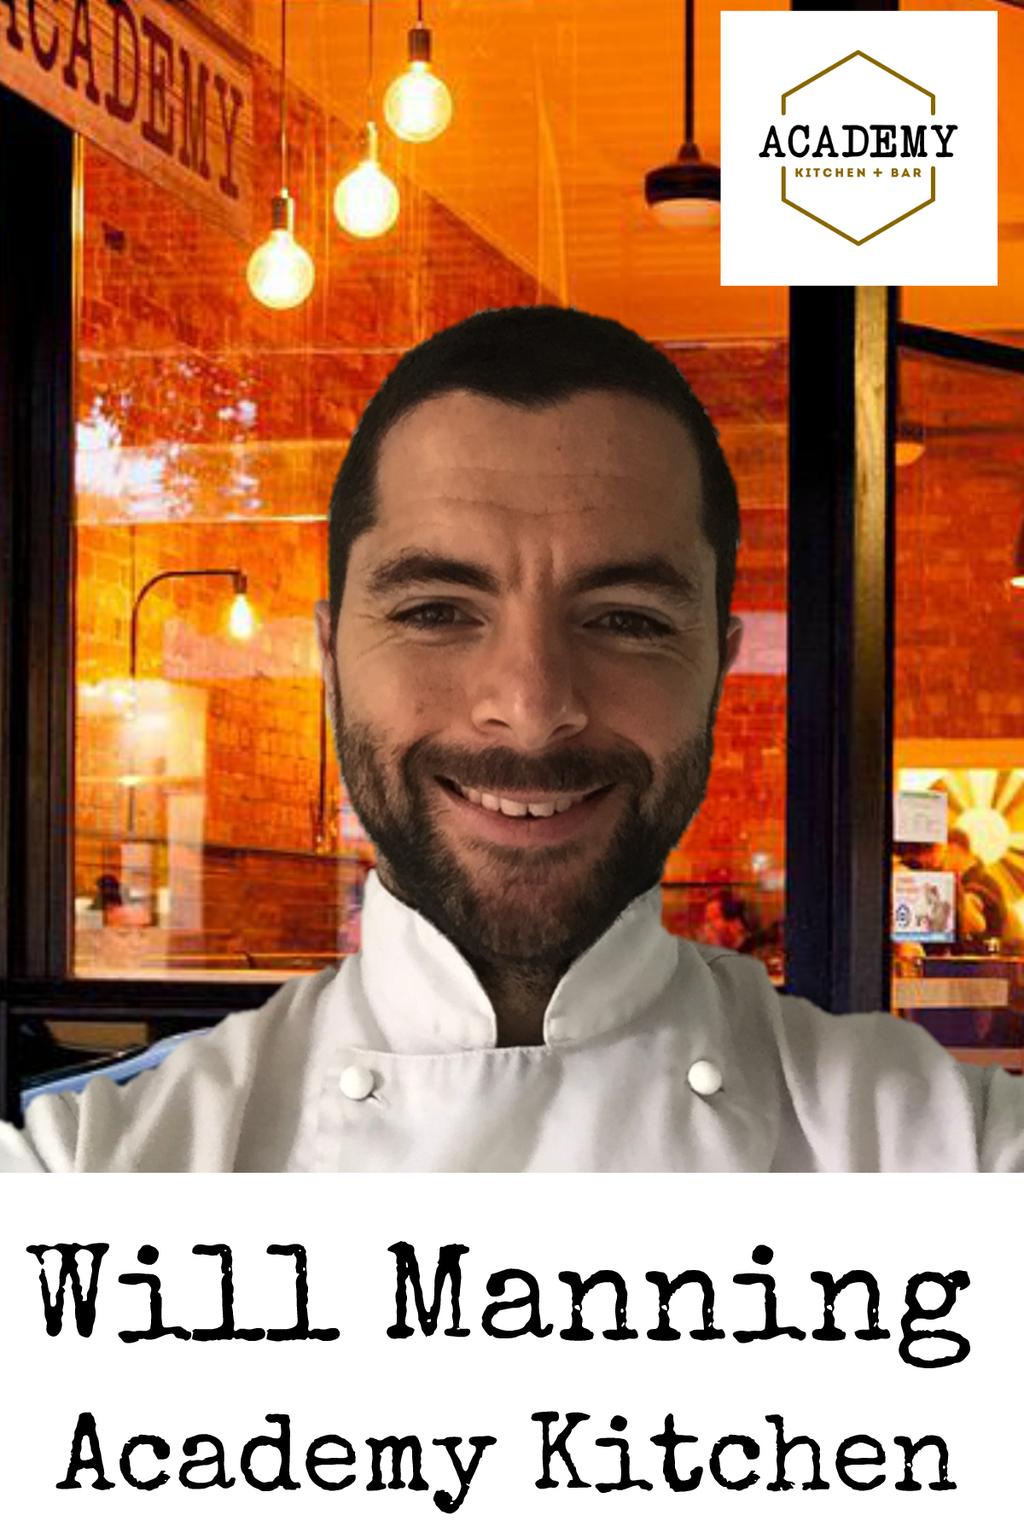 masterclasses class date 6 June cost $105 The latest venture by owner and chef Will Manning (formerly of La Trompette, Townhouse, Prospect Espress, The Botanical), Academy Kitchen & Bar